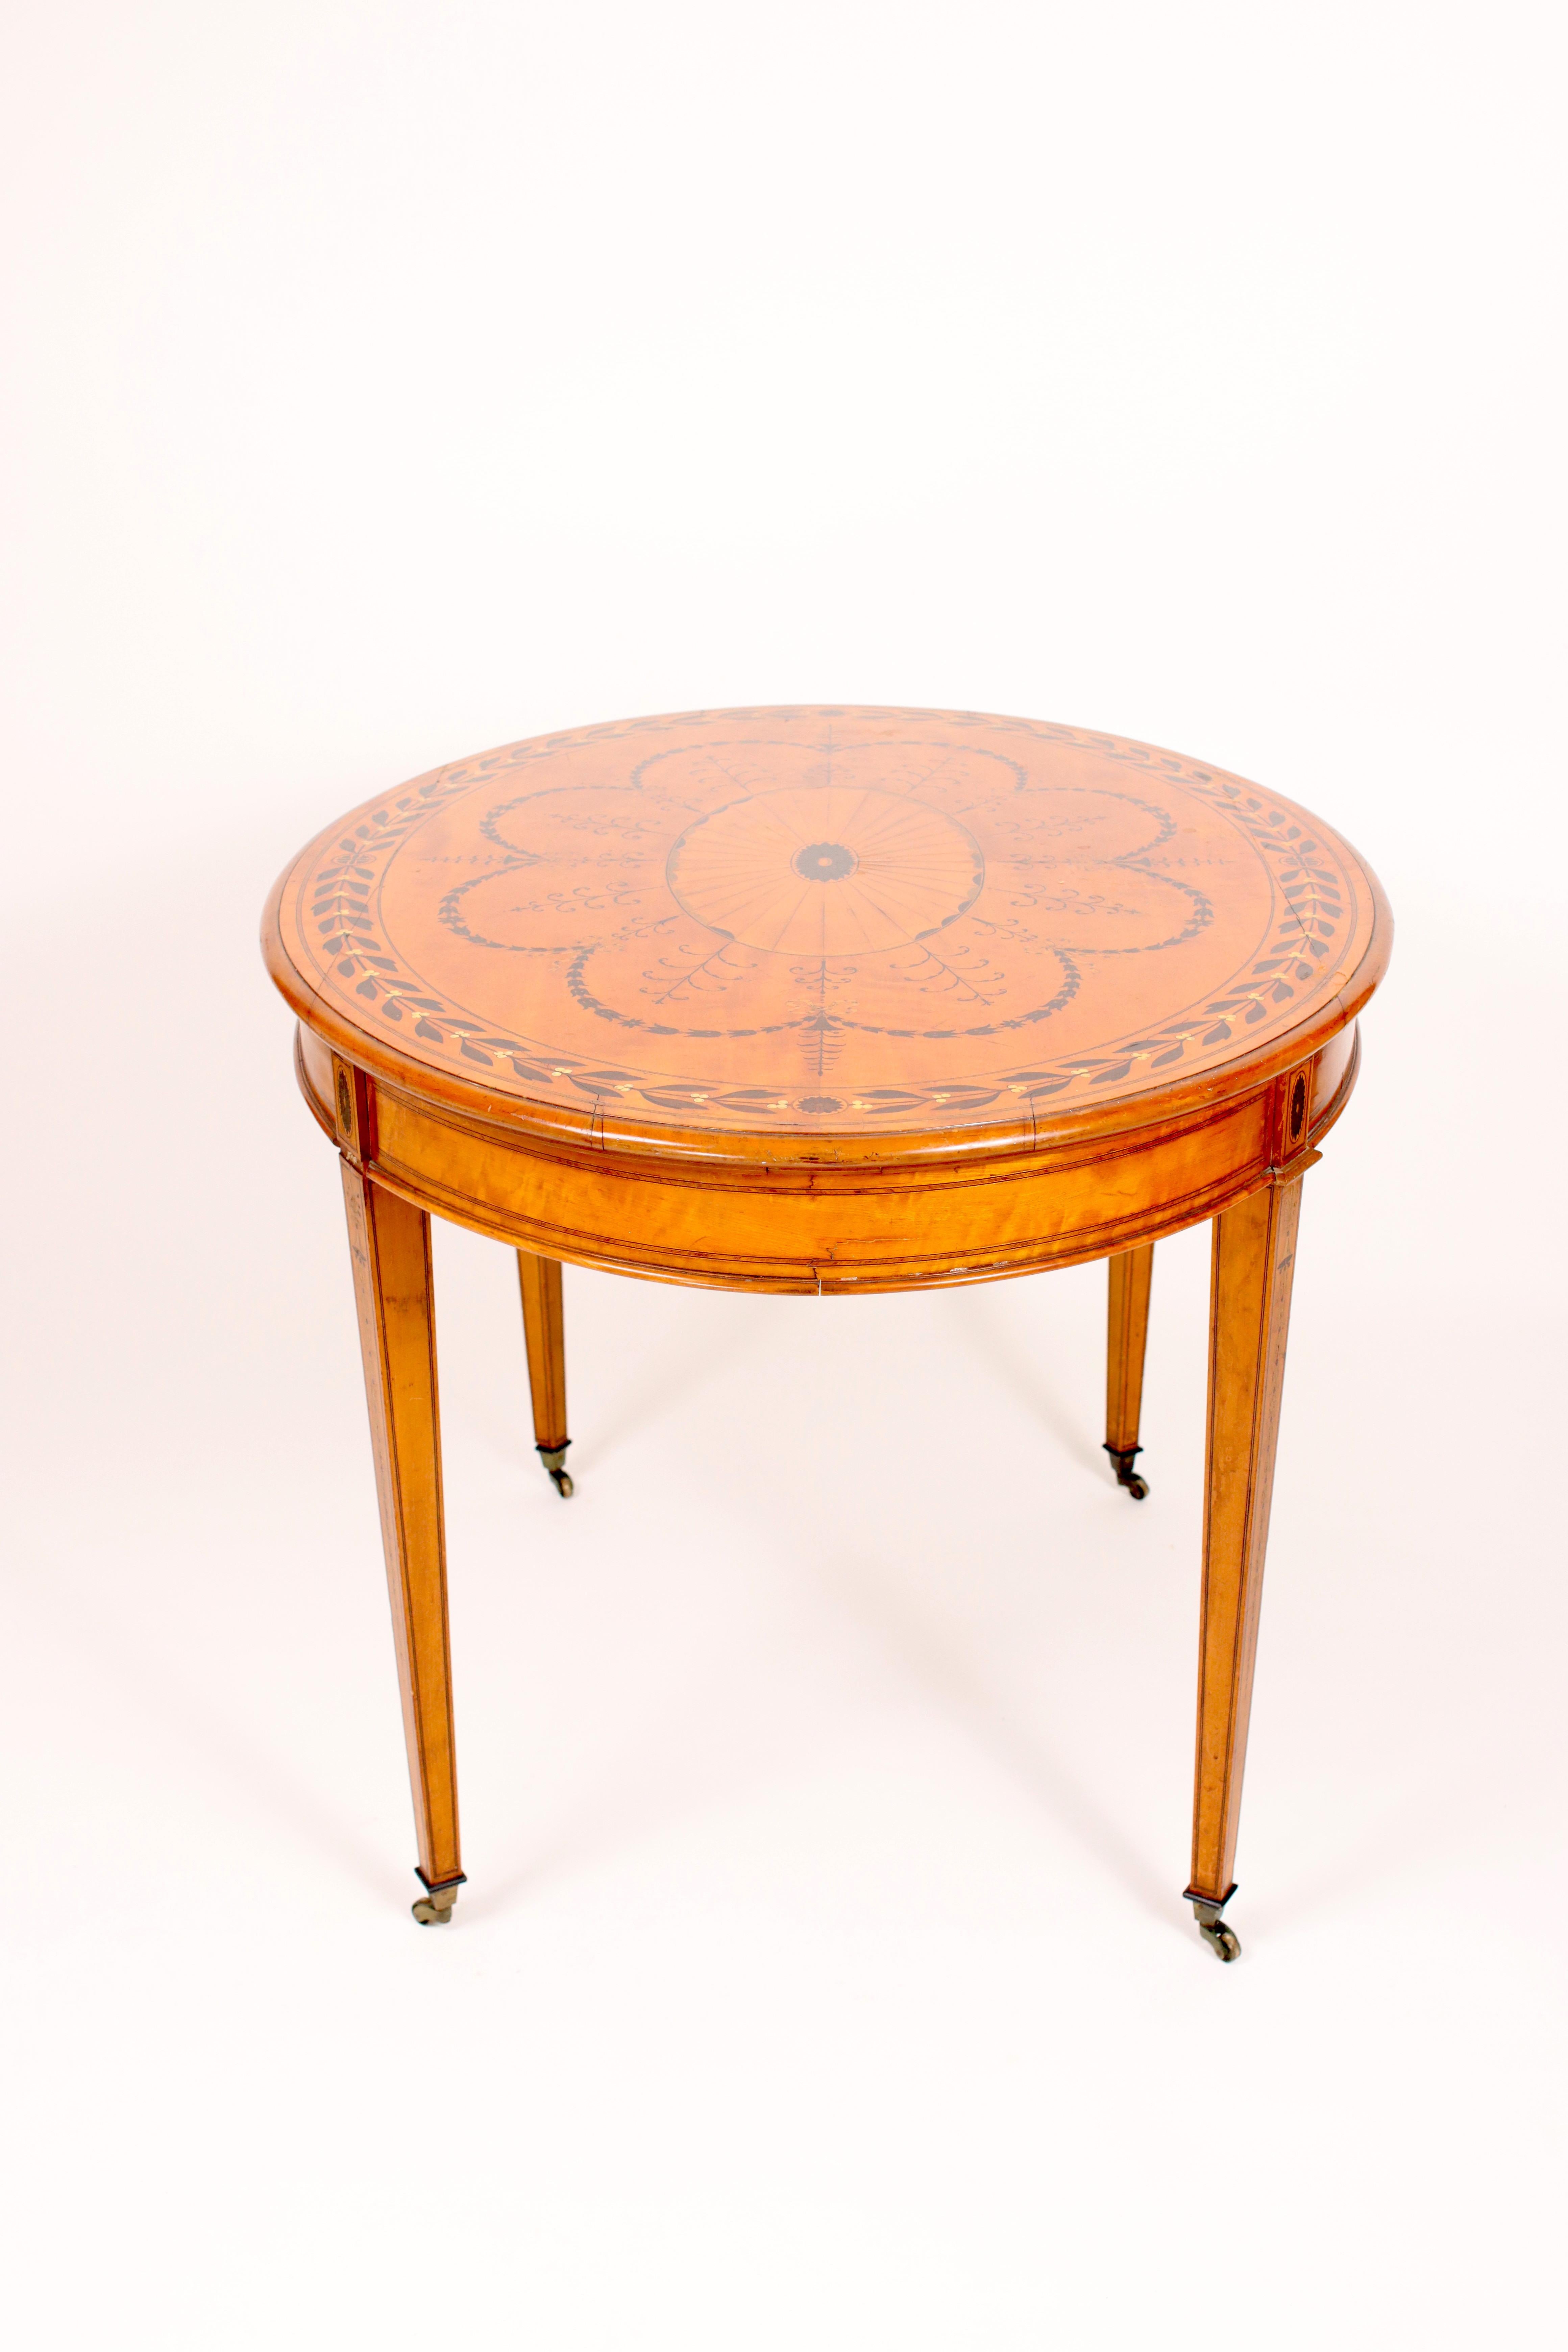 19th Century Hand Painted, Light Satinwood European, Oval Victorian Centre Table In Good Condition For Sale In Lincoln, GB